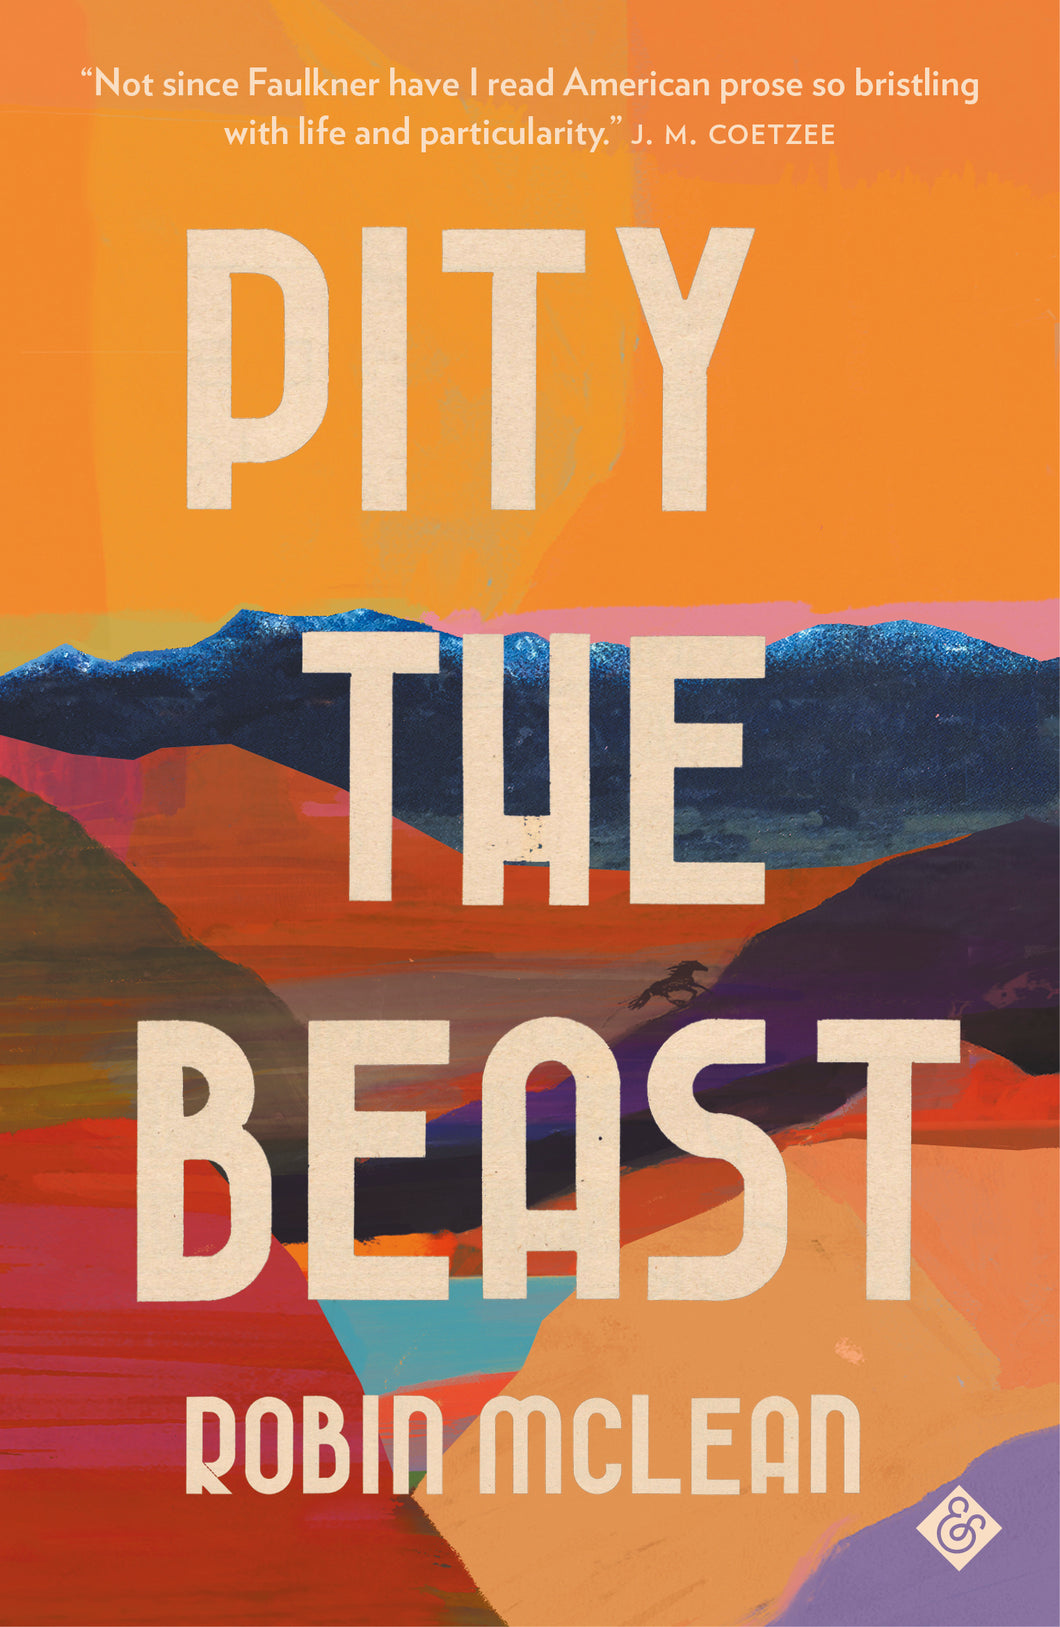 Pity the Beast